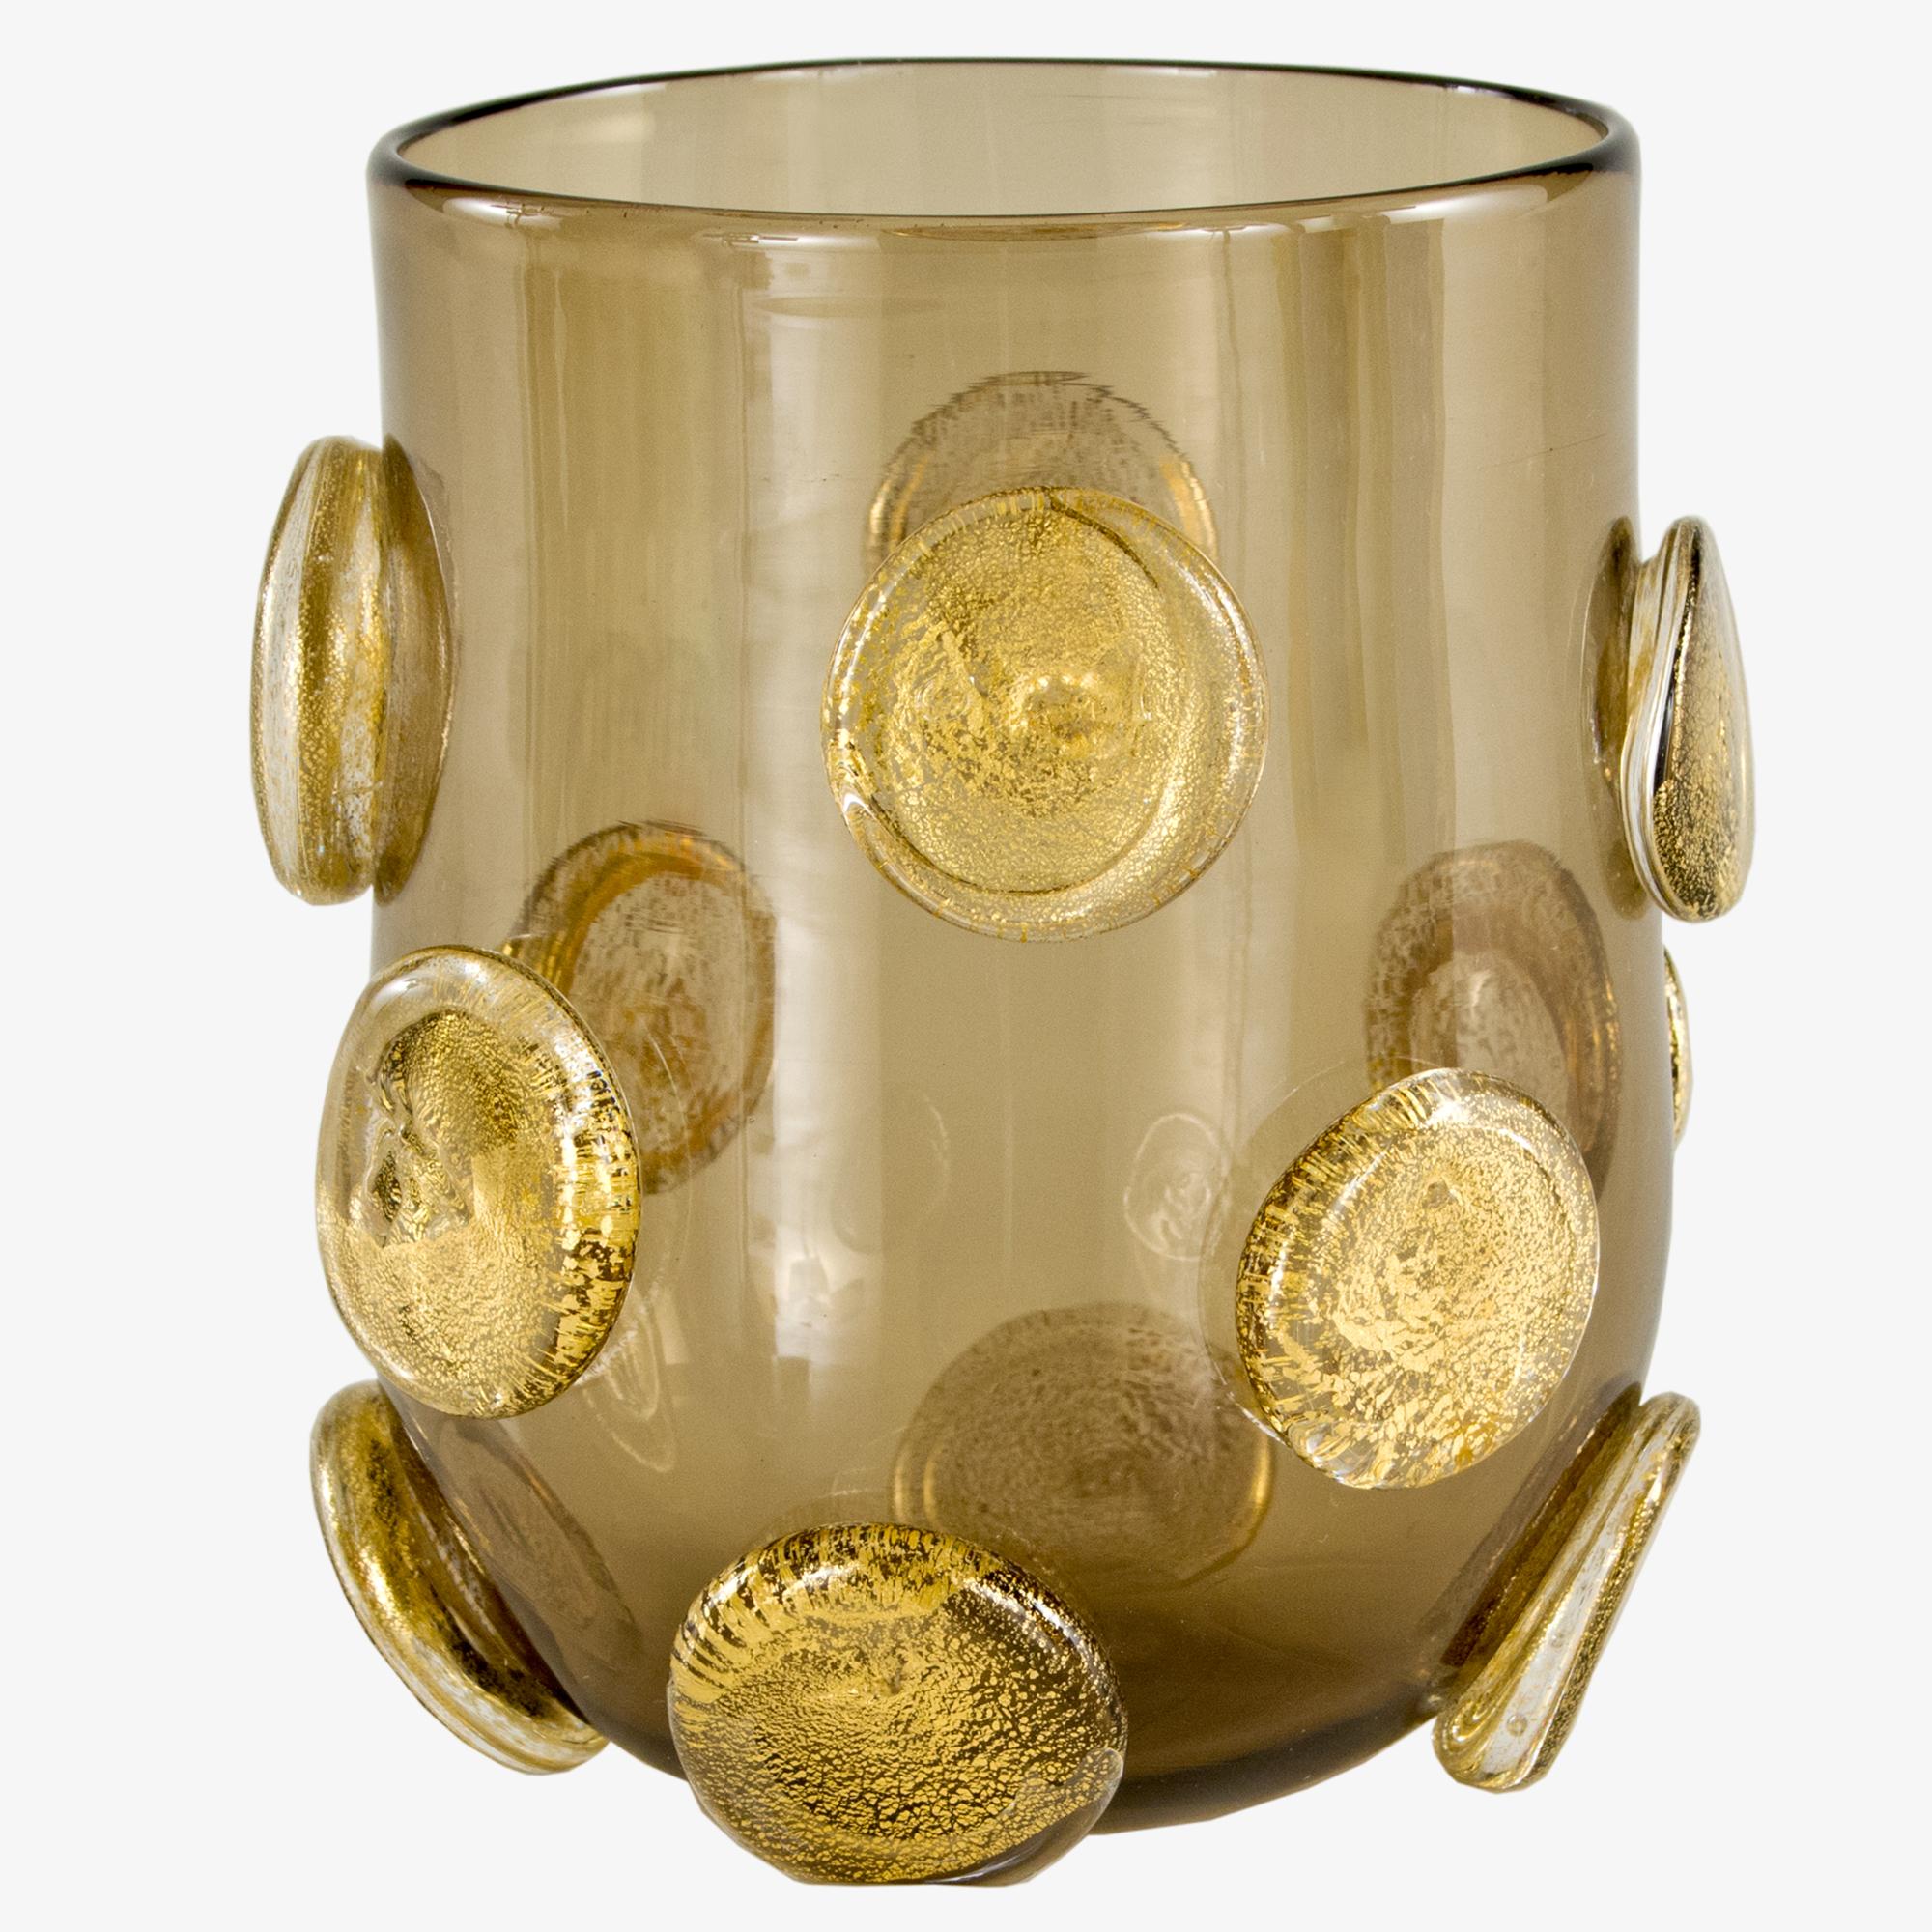 These artistic glasses are handmade by the master artisan in smoky color with golden leaf round applications.
Every piece differs one from the other.

Precious pieces that can enrich every table.

The handcrafted soul of our lighting products is